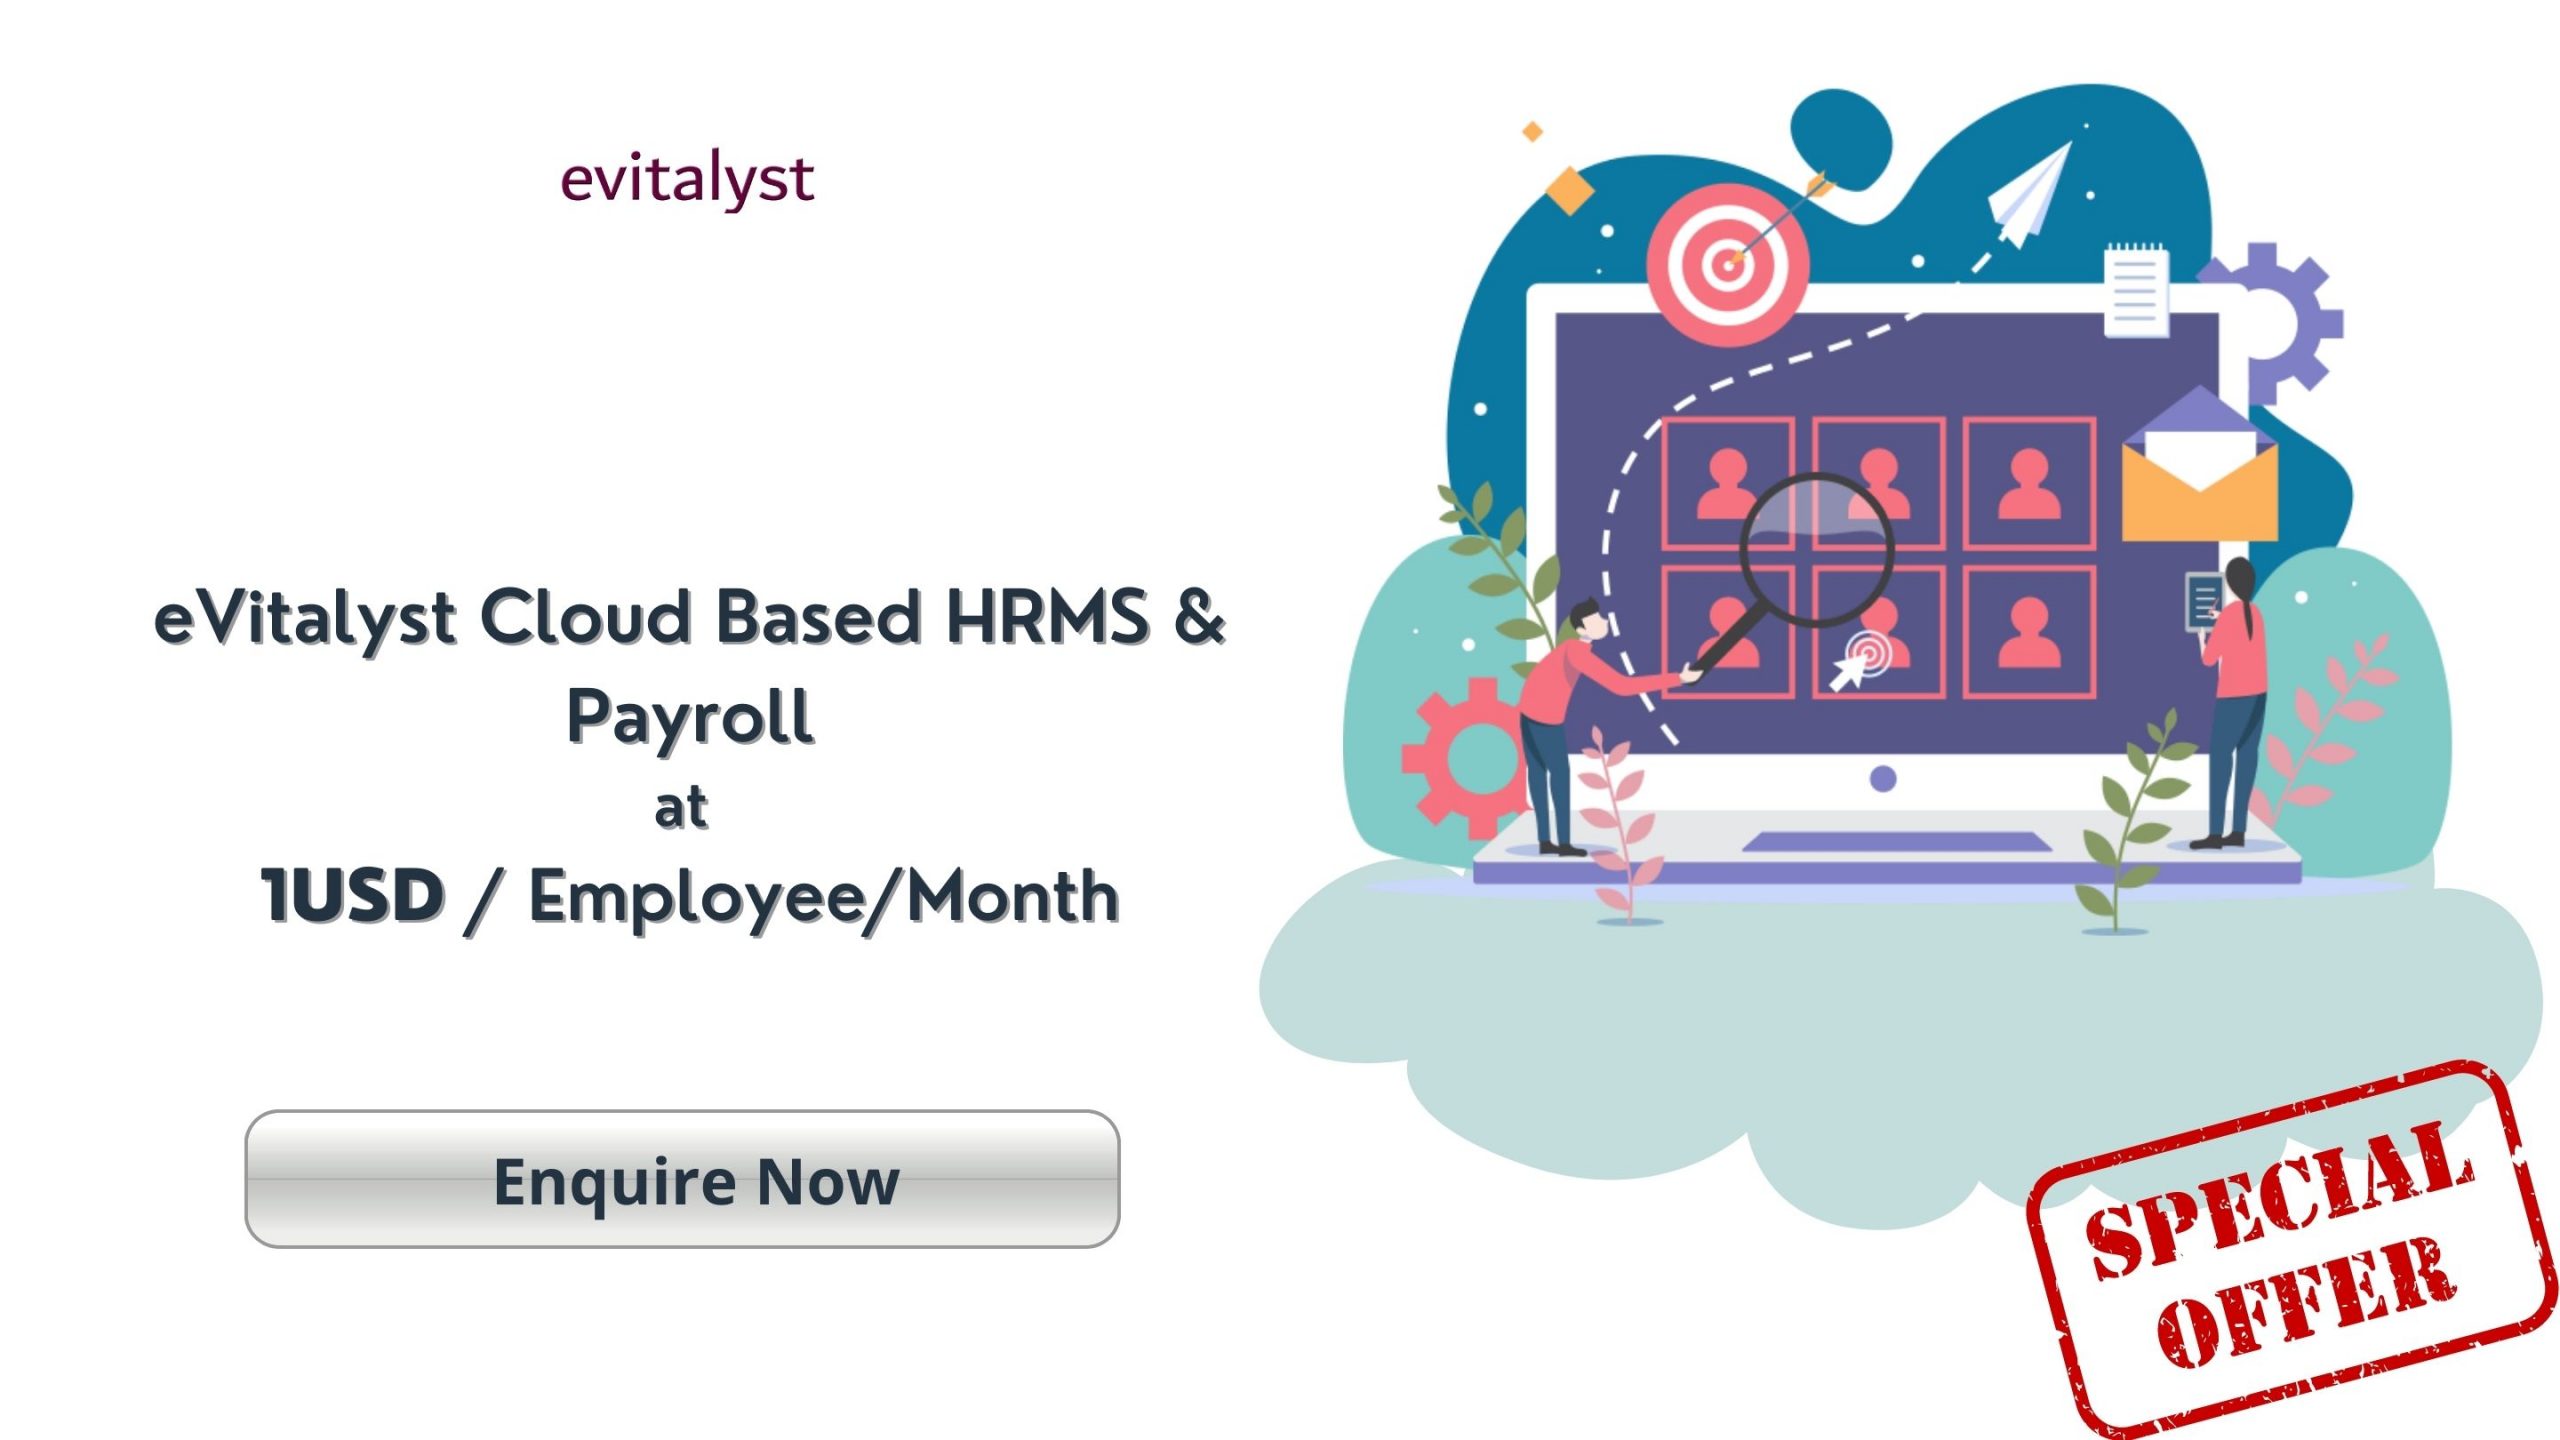 HRMS software in UAE, HRMS software in Dubai, Payroll software in UAE, Payroll software in Dubai